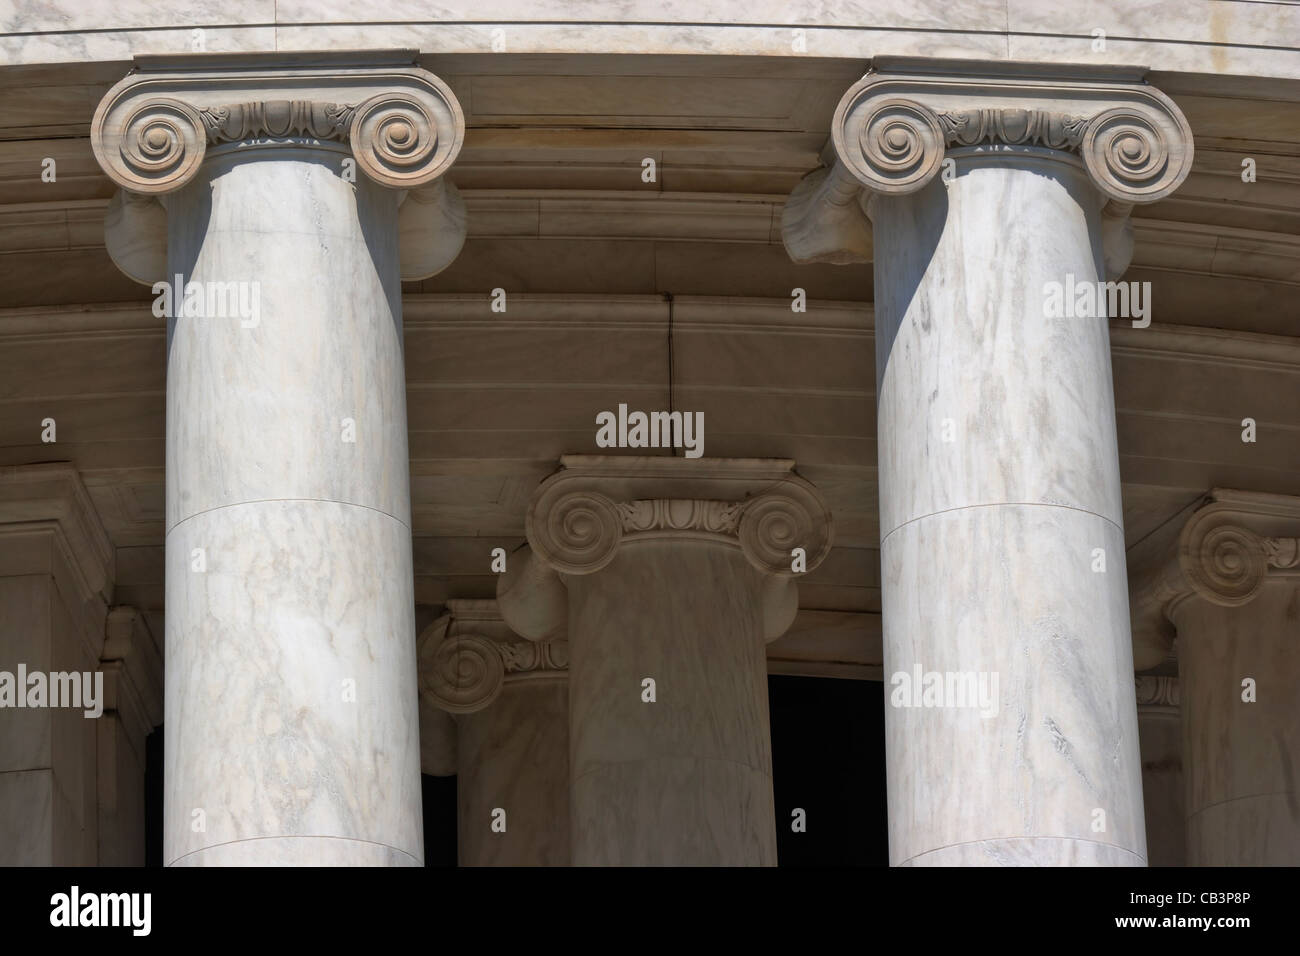 The columns and ionic capitals of the Jefferson Memorial, Washington, DC. Stock Photo